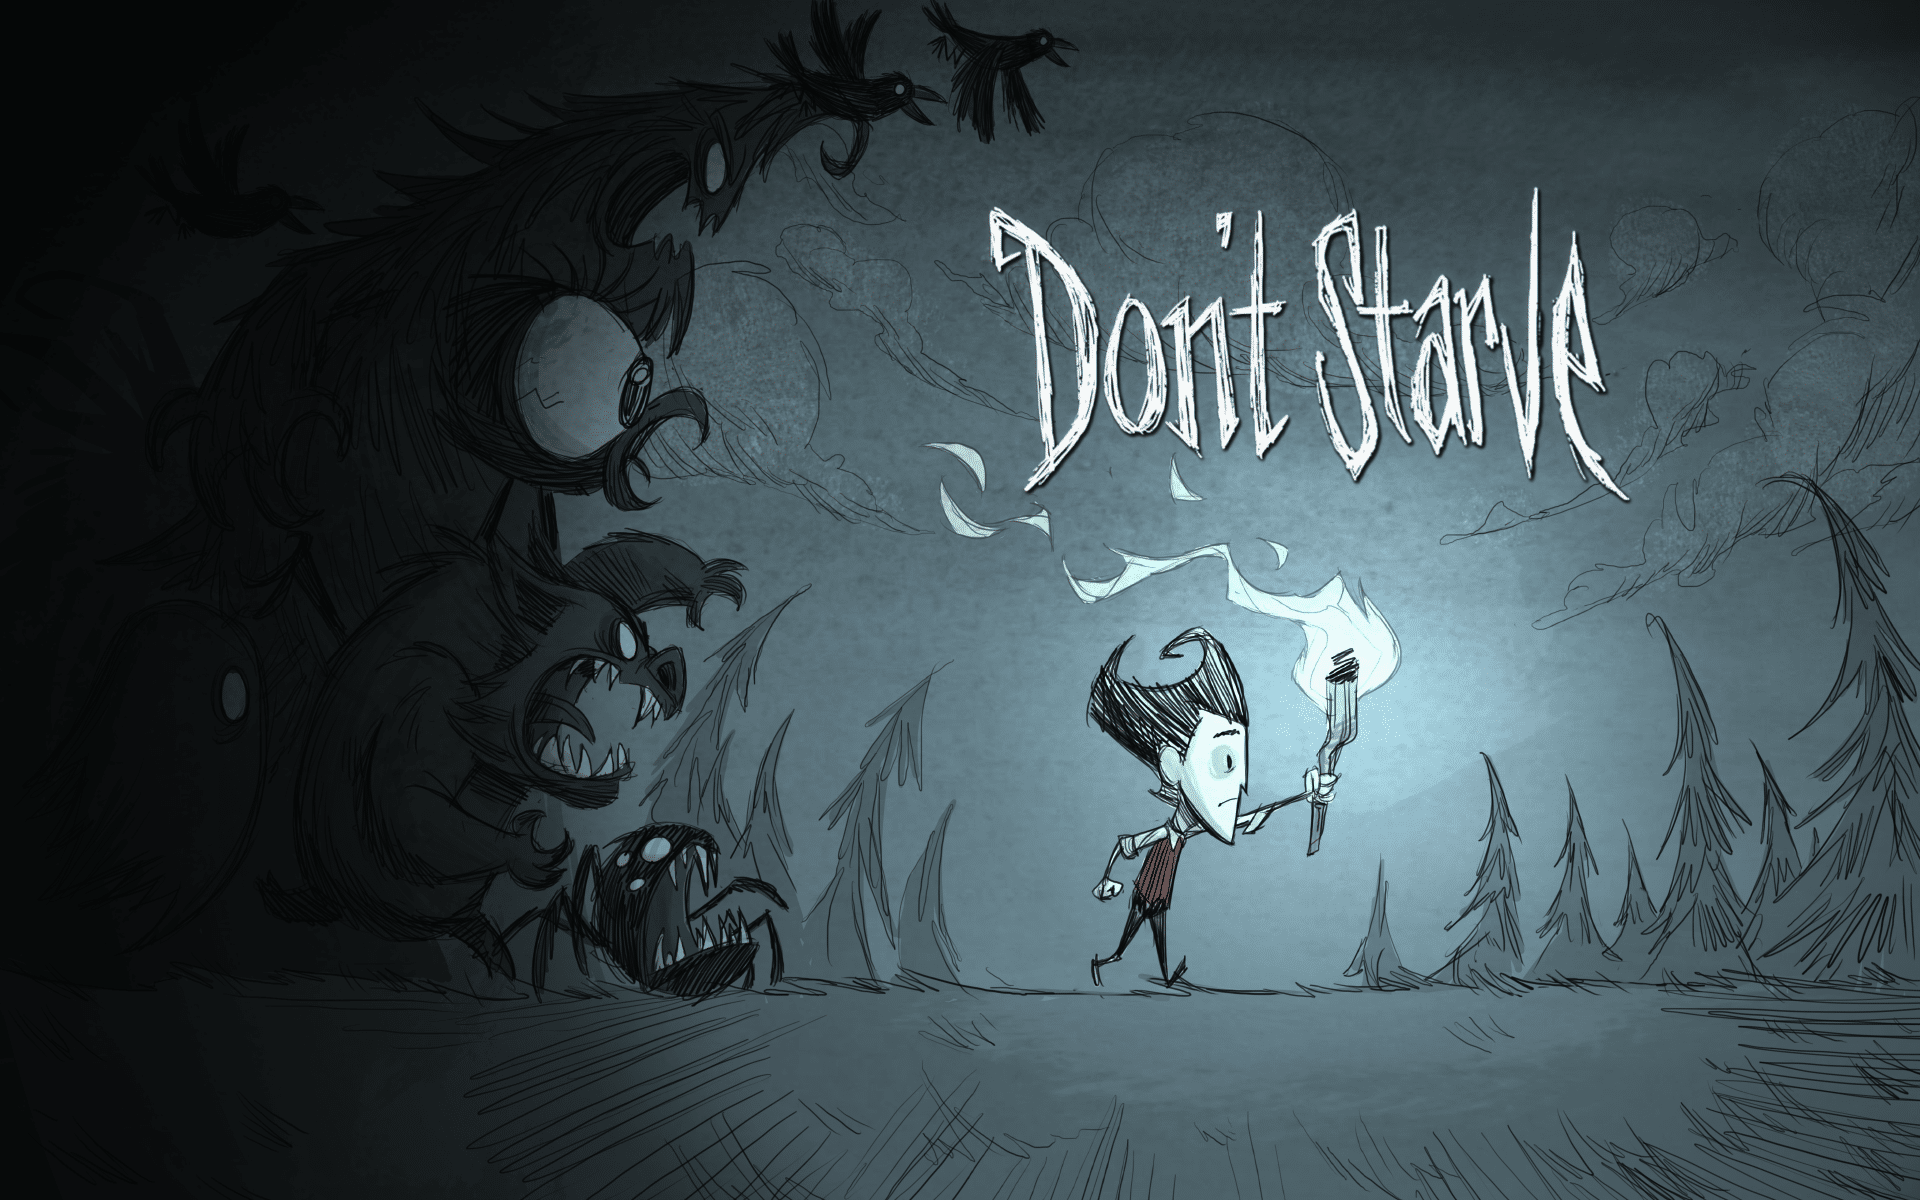 Don’t Starve is available!